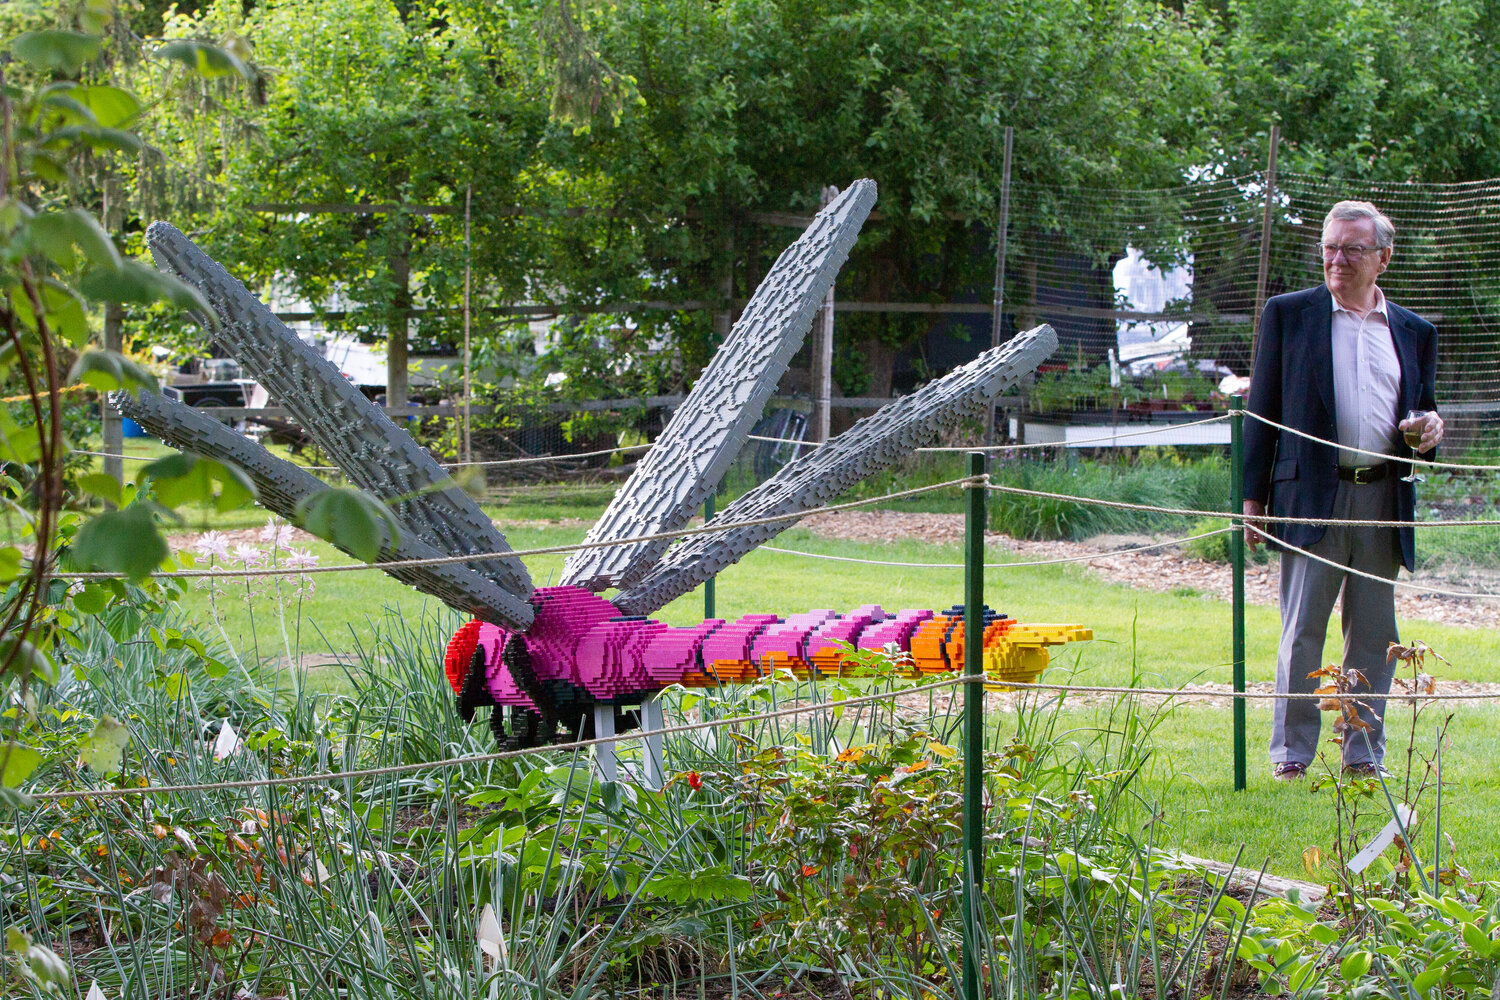 Paul Perrault checks out the dragonfly, which is made out of 27,788 bricks and took 515 hours to build.